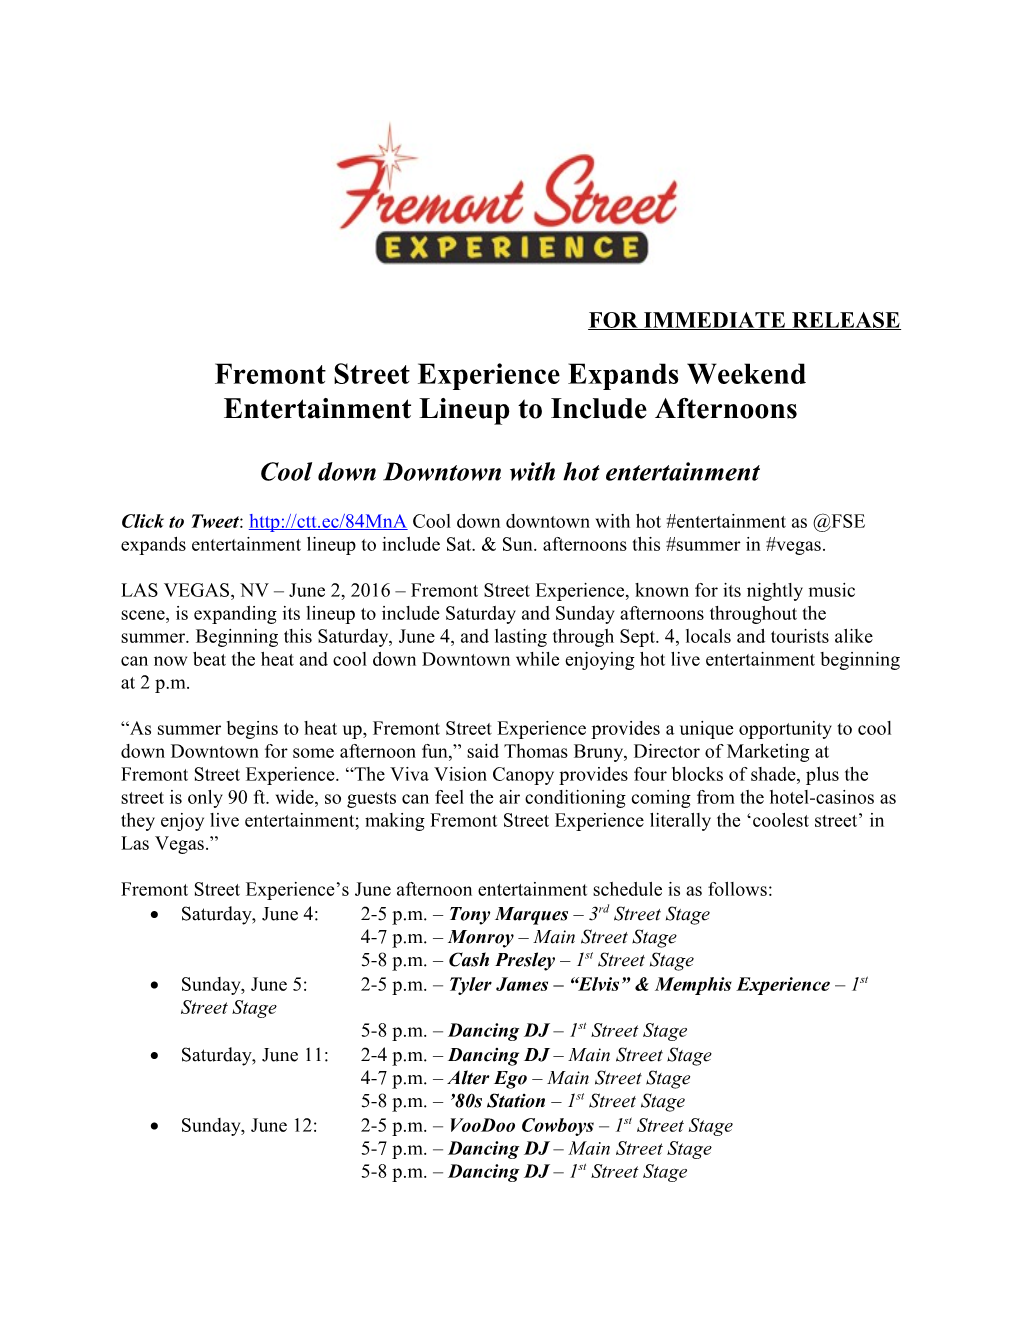 Fremont Street Experience Expands Weekend Entertainment Lineup to Include Afternoons